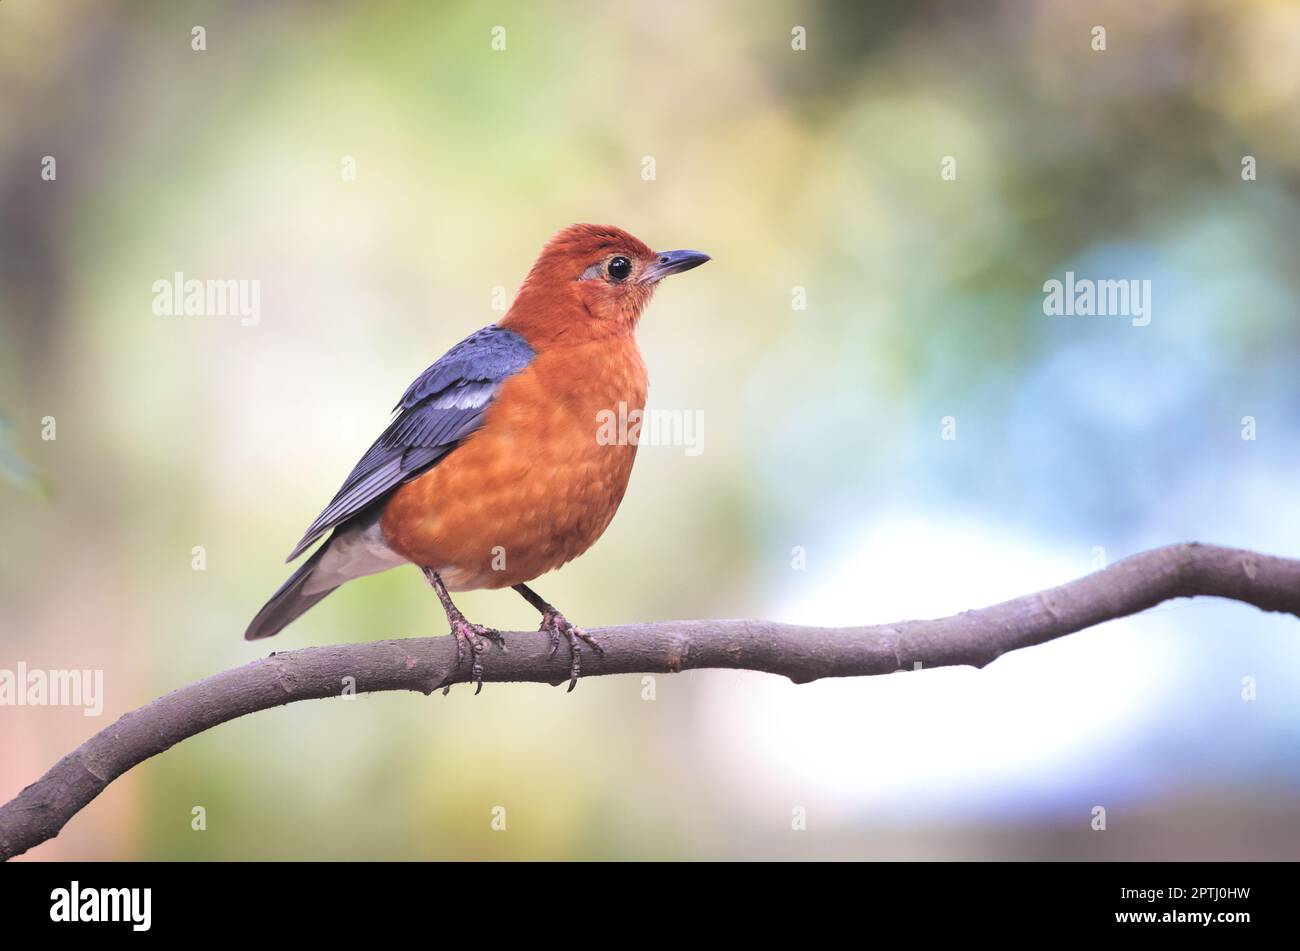 orange-headed thrush is a bird in the thrush family. It is common in well-wooded areas of the Indian Subcontinent and Southeast Asia. Stock Photo